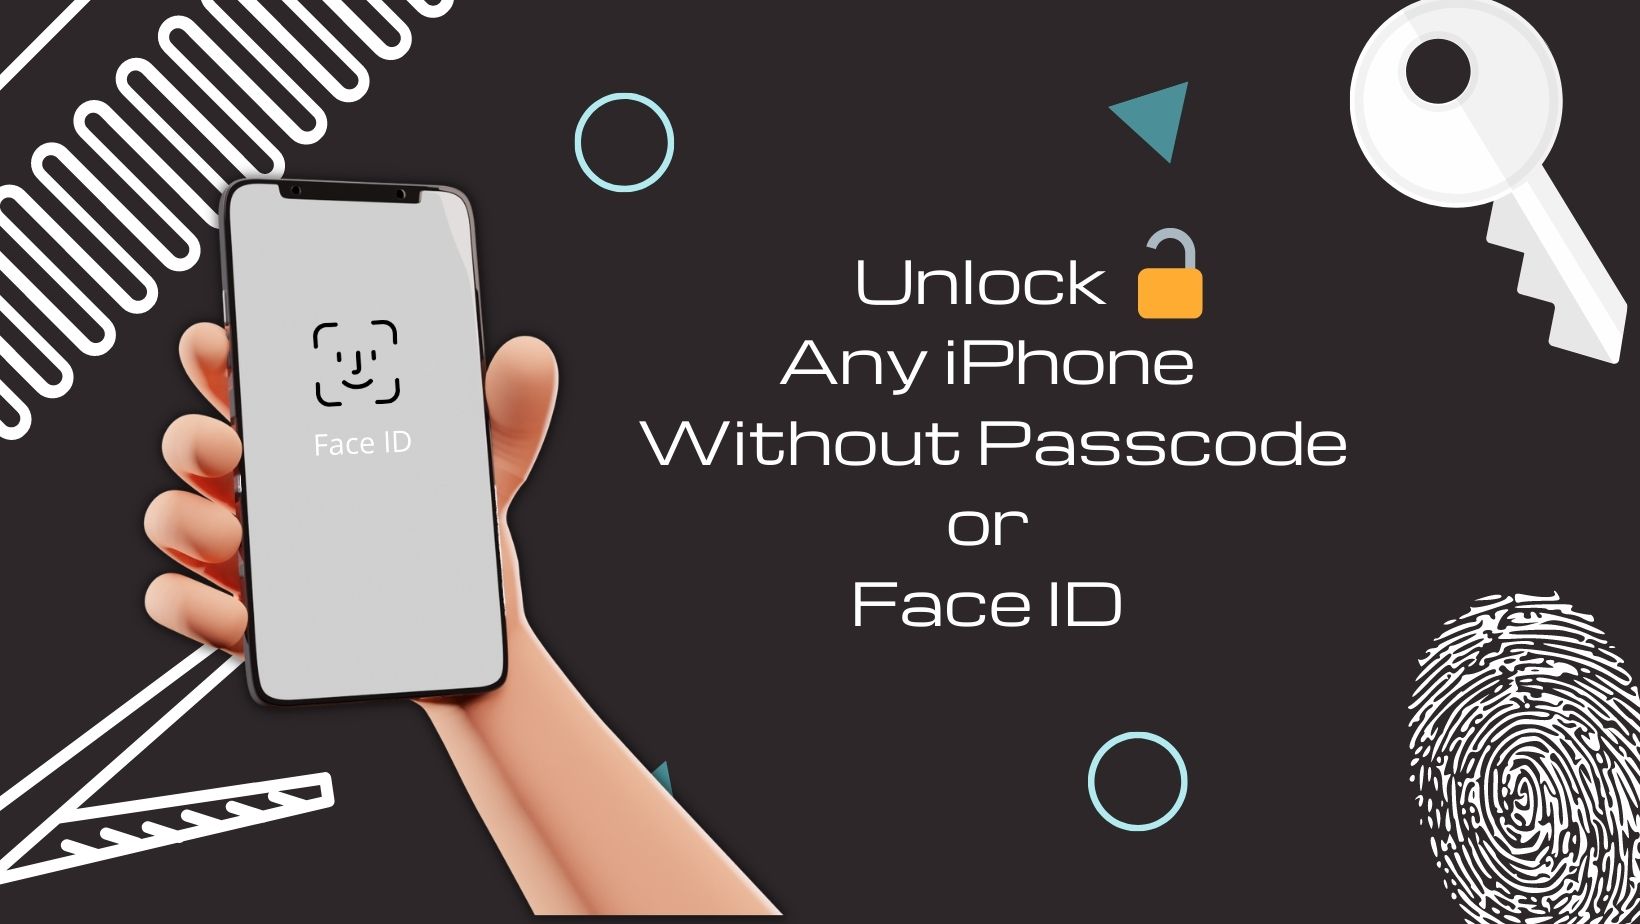 Unlock Any iPhone Without Passcode or Face ID